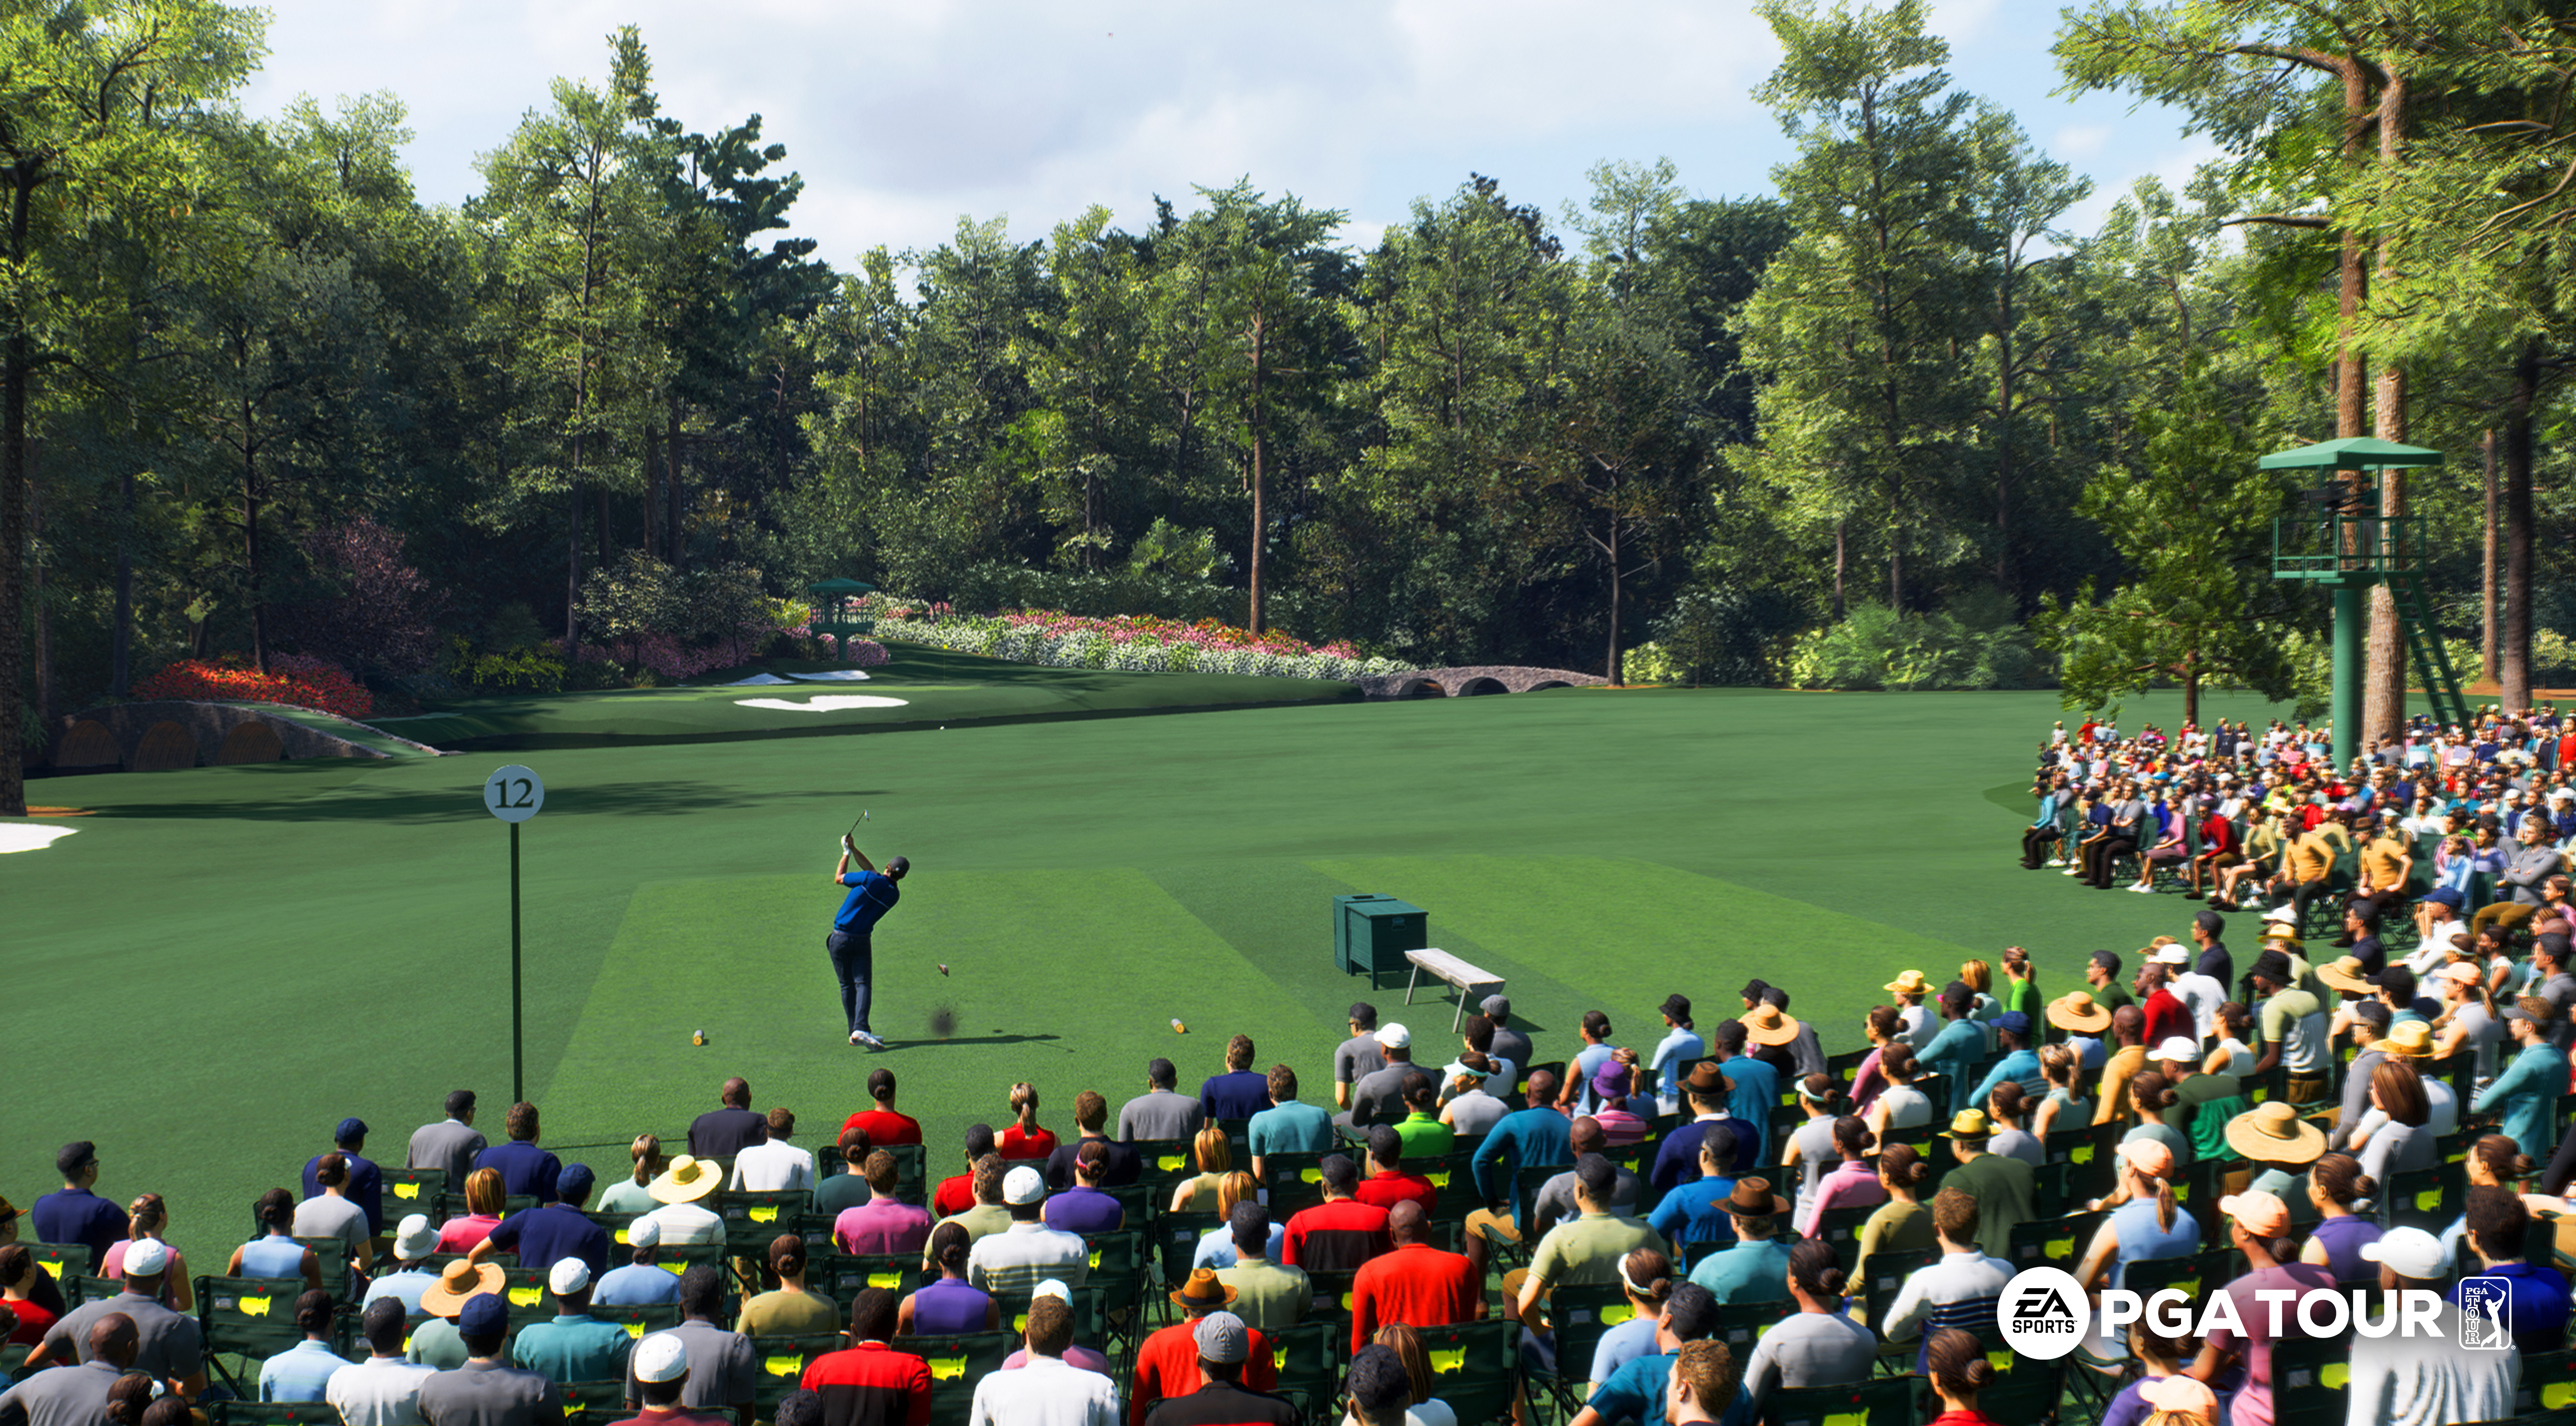 a screenshot from EA Sports PGA Tour of hole 12 at Augusta National, seen from the crowd: a golfer launches his drive at a par-3 green in the distance